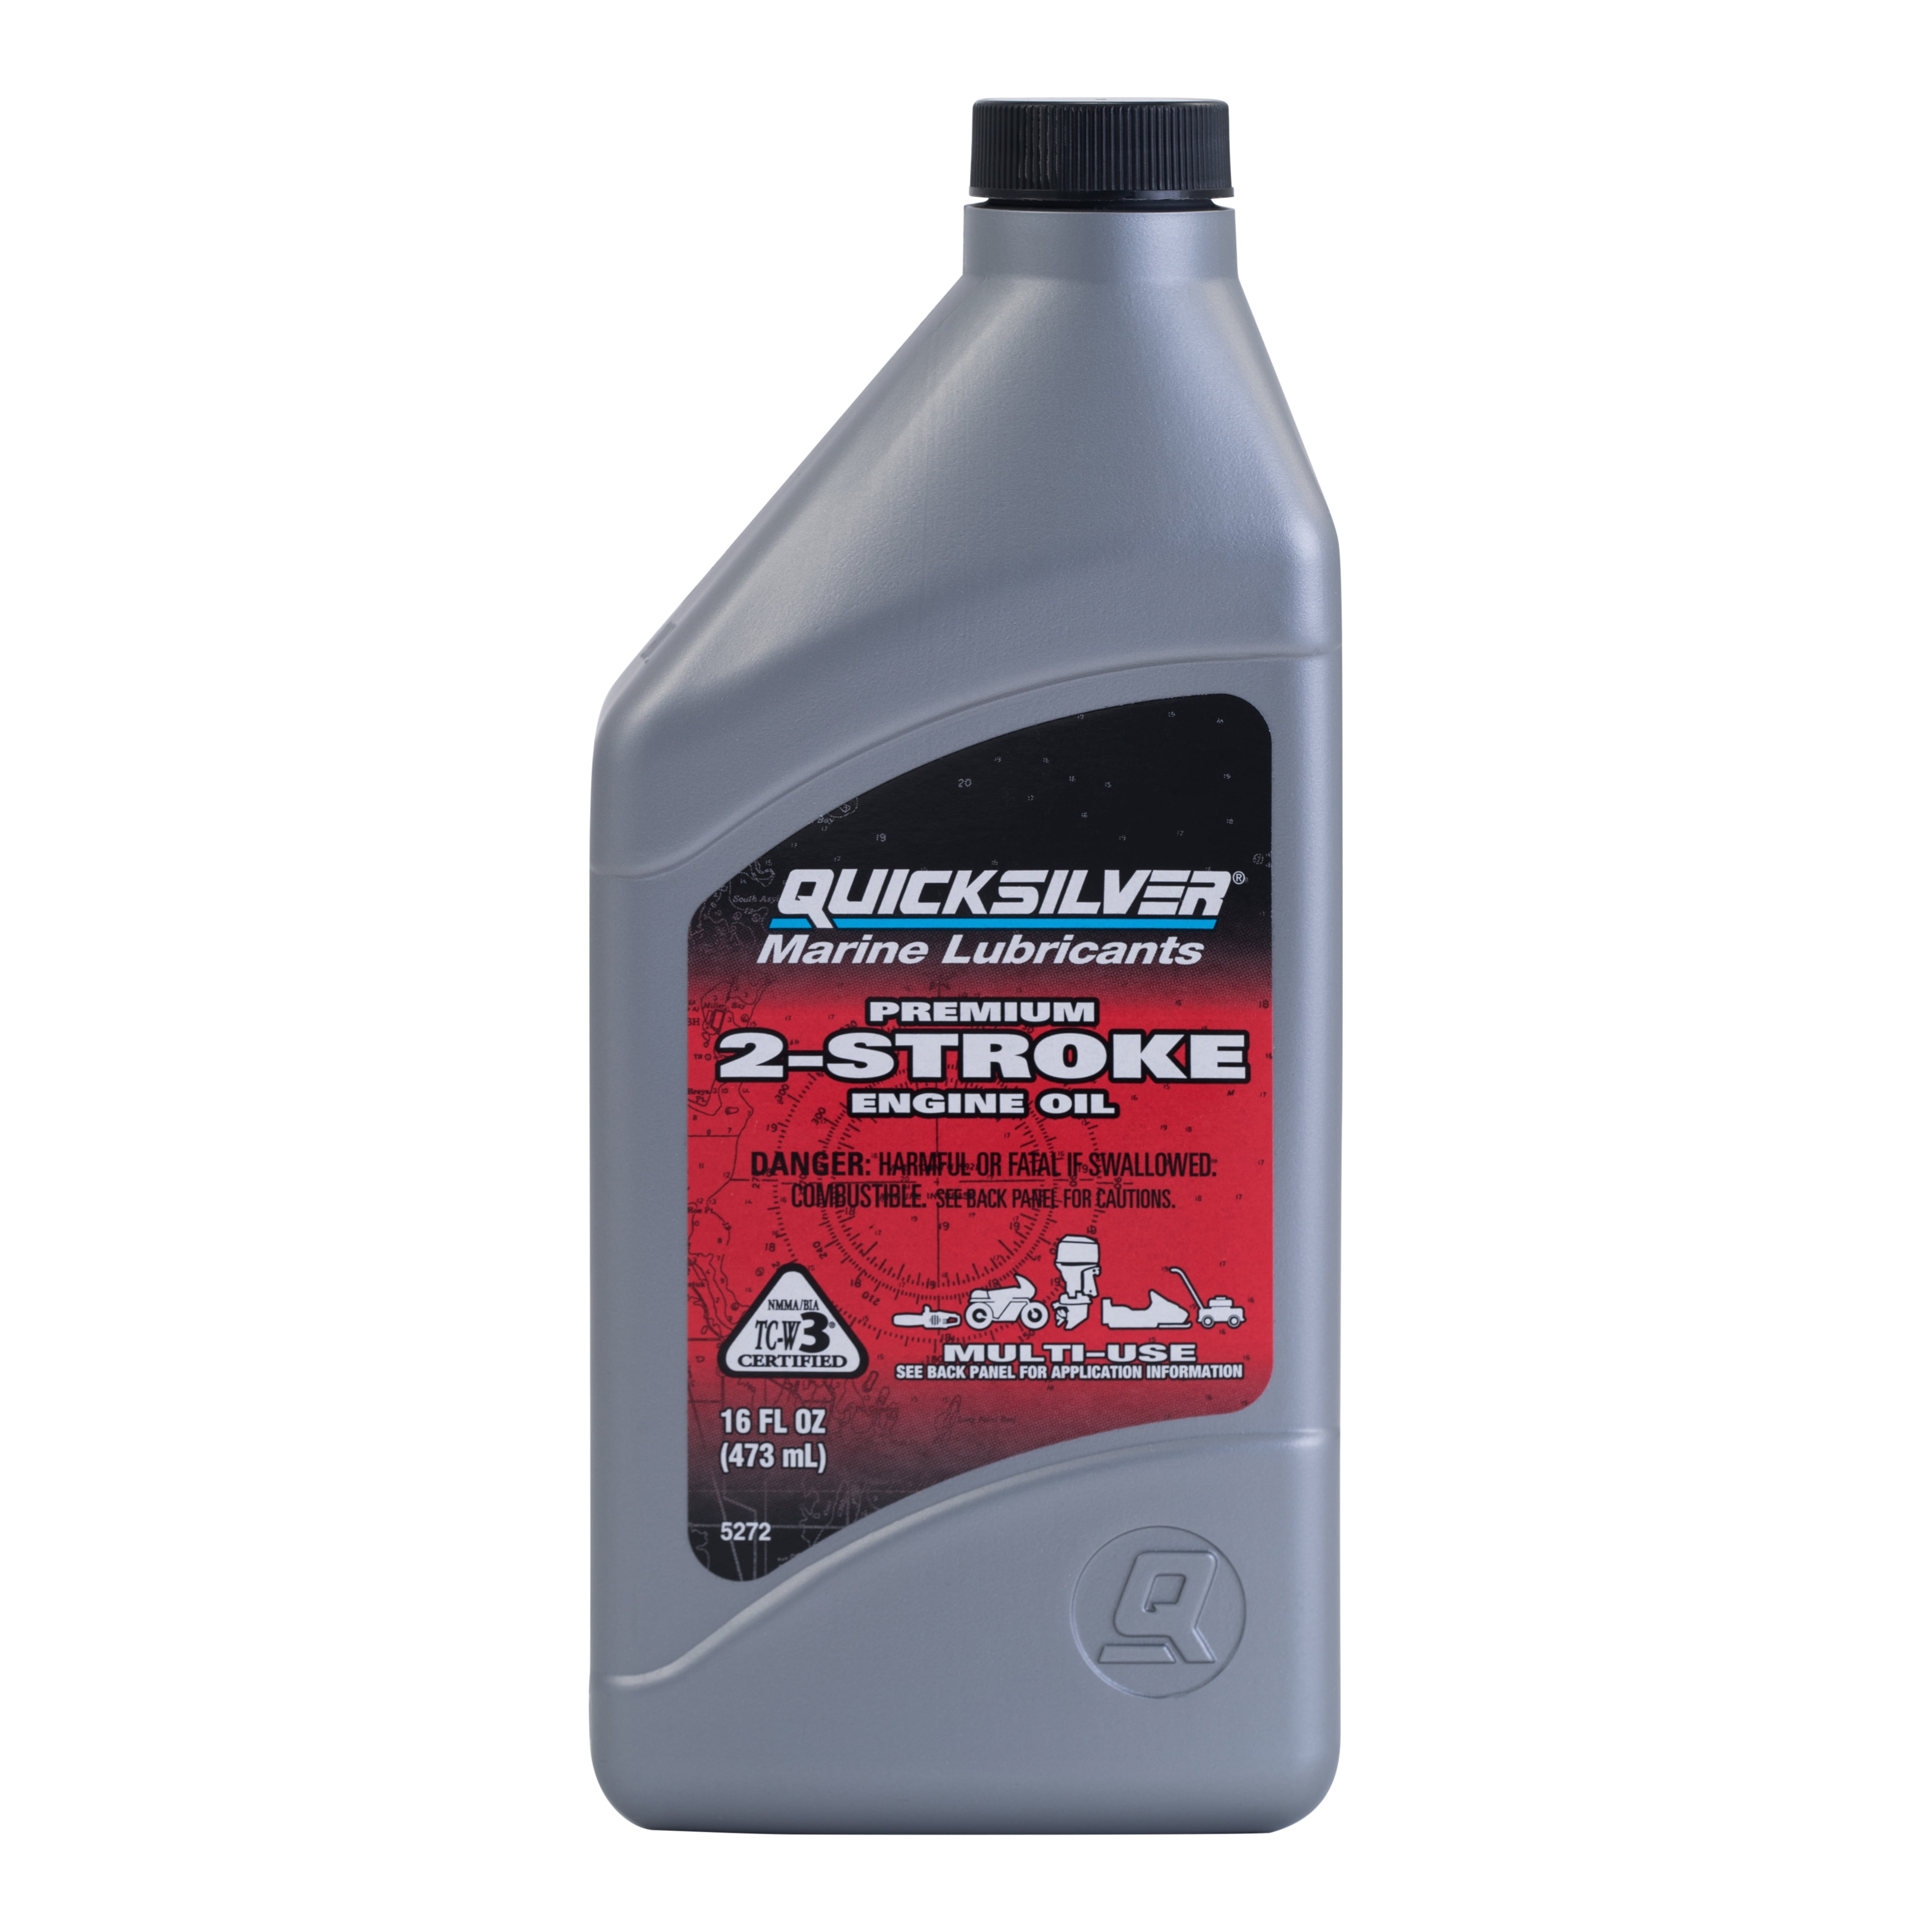 Quicksilver Premium 2-Stroke Engine Oil – Outboards, PWCs, Snowmobiles and Motorcycles - 1 Pint